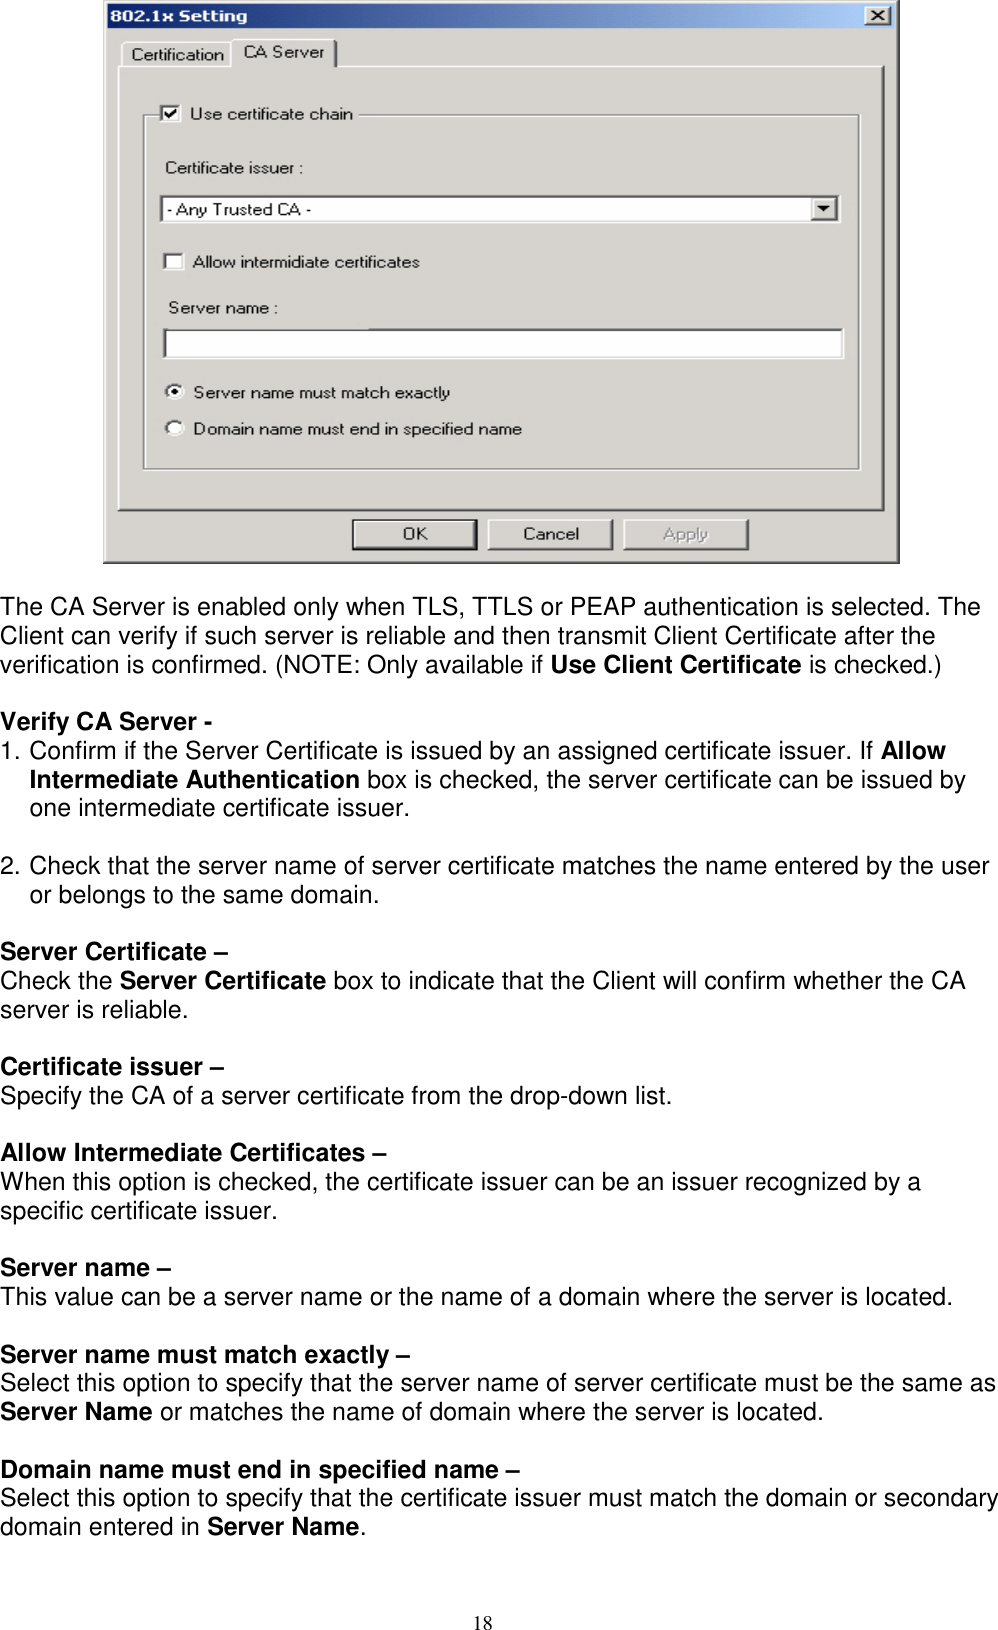 18     The CA Server is enabled only when TLS, TTLS or PEAP authentication is selected. The Client can verify if such server is reliable and then transmit Client Certificate after the verification is confirmed. (NOTE: Only available if Use Client Certificate is checked.)  Verify CA Server -   1. Confirm if the Server Certificate is issued by an assigned certificate issuer. If Allow Intermediate Authentication box is checked, the server certificate can be issued by one intermediate certificate issuer.  2. Check that the server name of server certificate matches the name entered by the user or belongs to the same domain.  Server Certificate –   Check the Server Certificate box to indicate that the Client will confirm whether the CA server is reliable.  Certificate issuer –   Specify the CA of a server certificate from the drop-down list.  Allow Intermediate Certificates –   When this option is checked, the certificate issuer can be an issuer recognized by a specific certificate issuer.    Server name –   This value can be a server name or the name of a domain where the server is located.  Server name must match exactly –   Select this option to specify that the server name of server certificate must be the same as Server Name or matches the name of domain where the server is located.  Domain name must end in specified name –   Select this option to specify that the certificate issuer must match the domain or secondary domain entered in Server Name.  